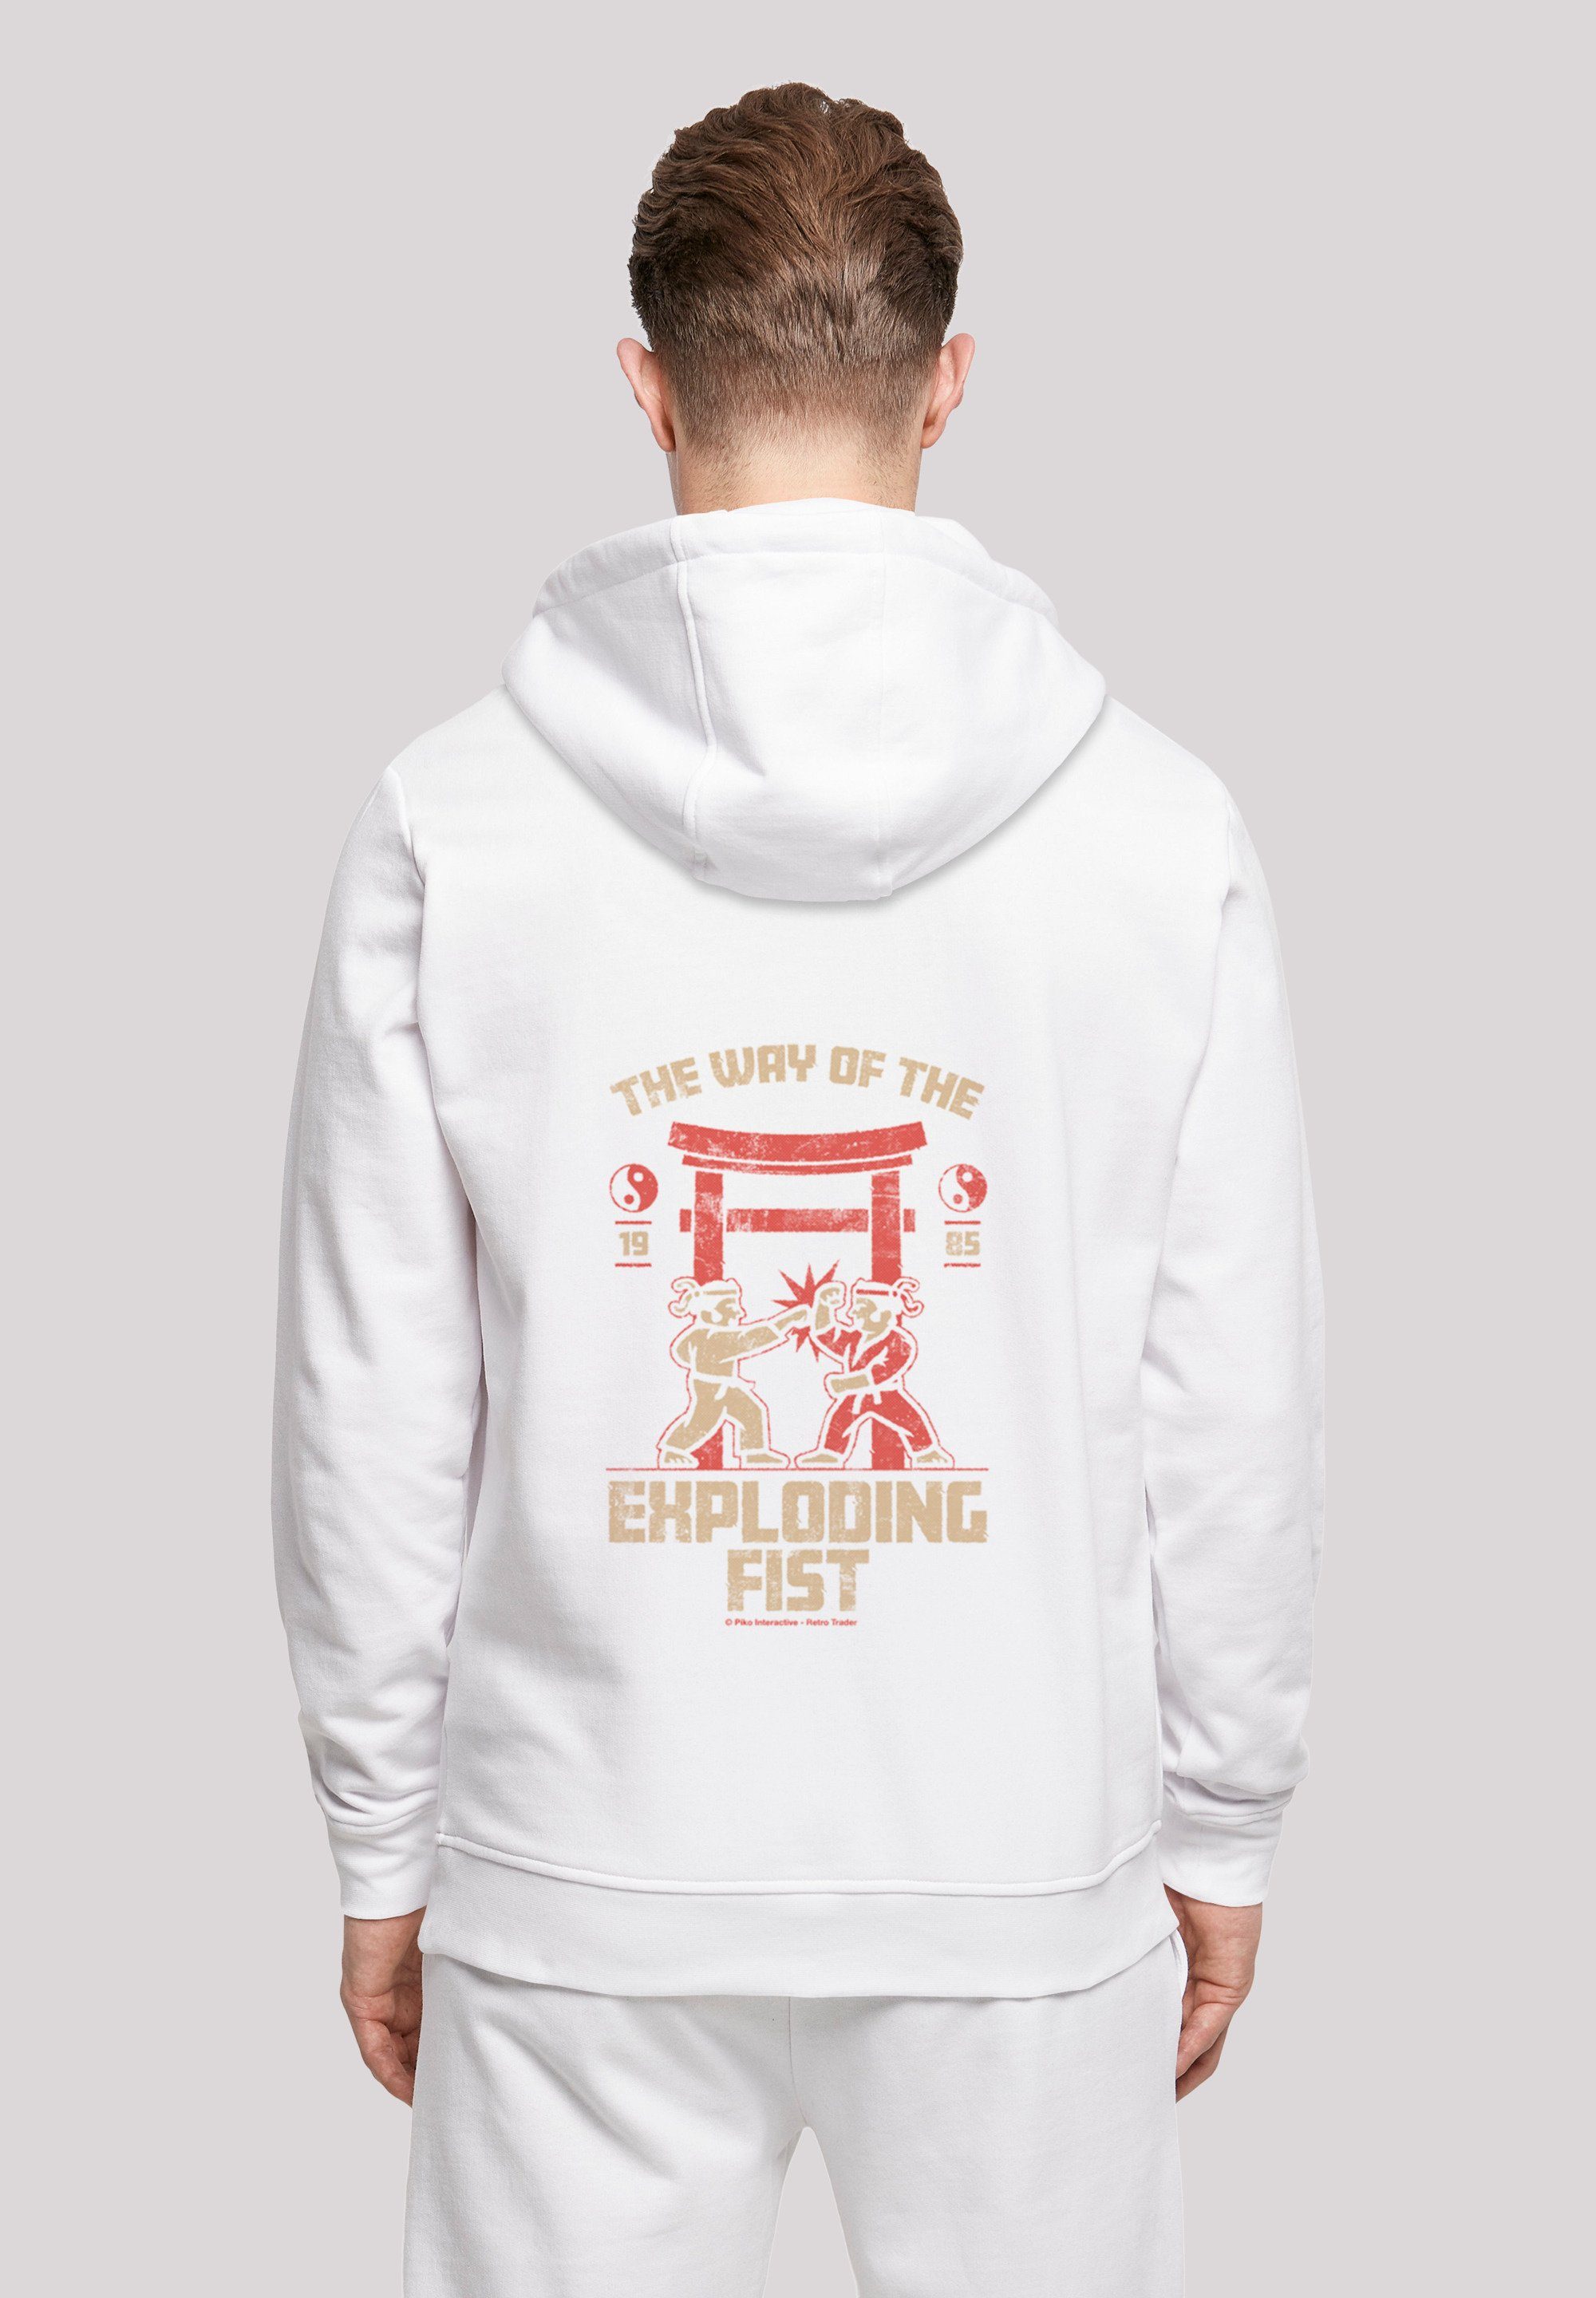 Exploding Kapuzenpullover Print The F4NT4STIC the Way Retro of Gaming weiß Fist